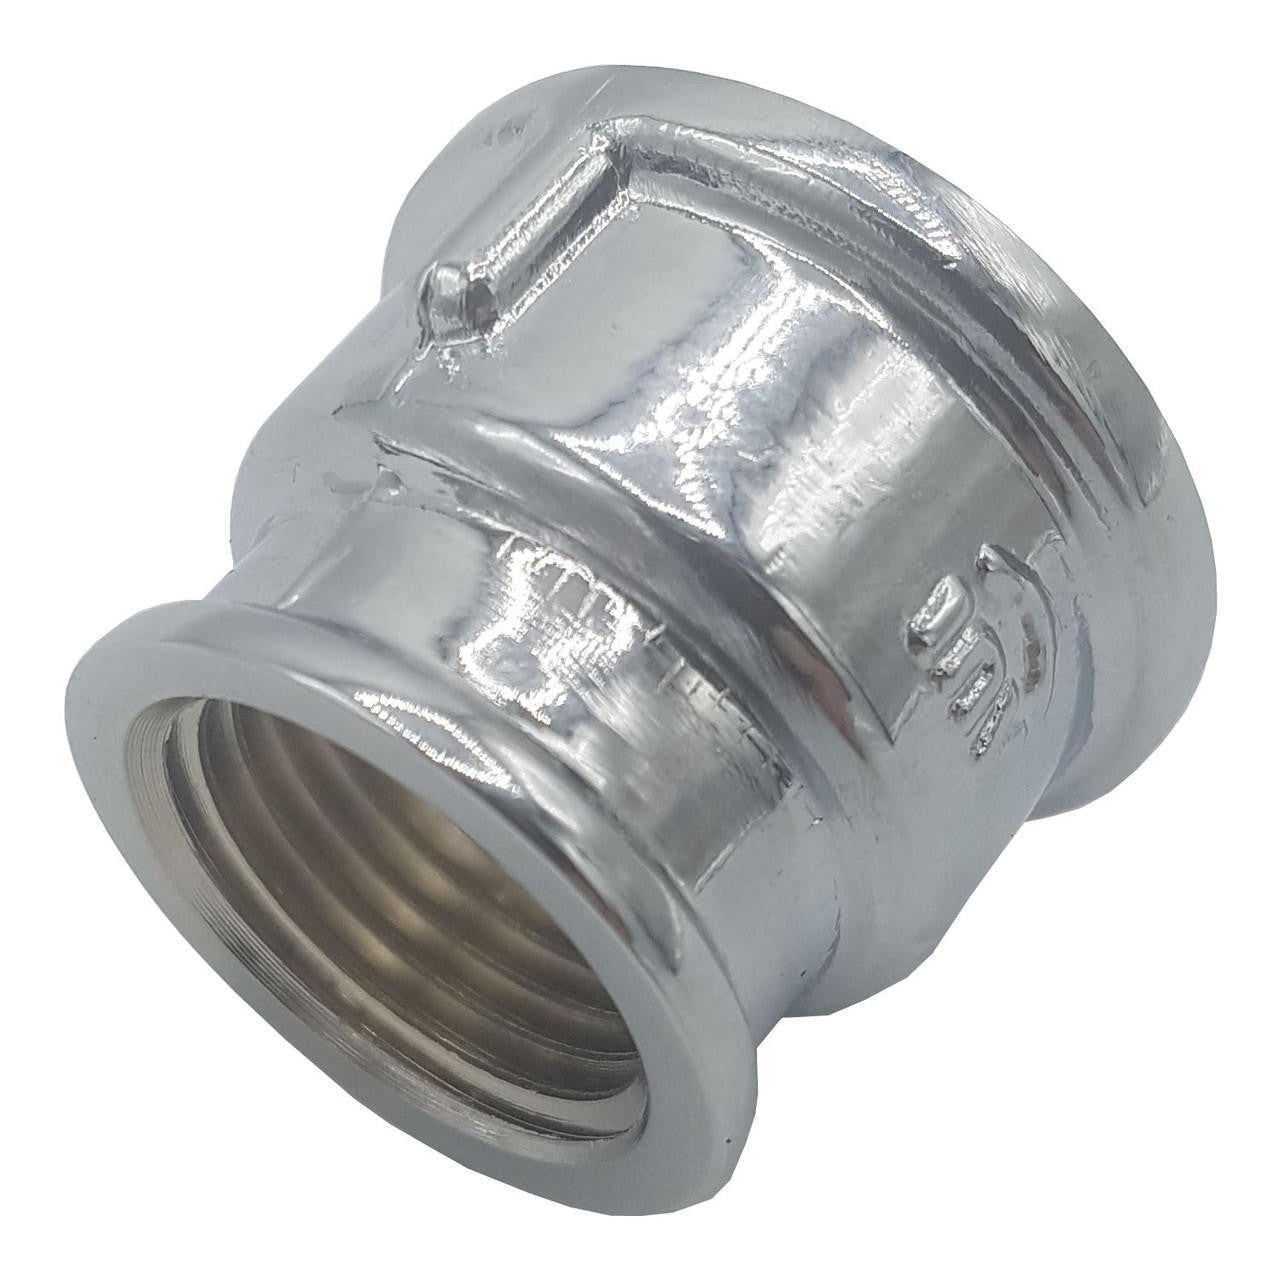 Invena Chromed Threaded Pipe Coupling Reducer Female Fittings 1/2 x 3/8 3/4 x 1/2 